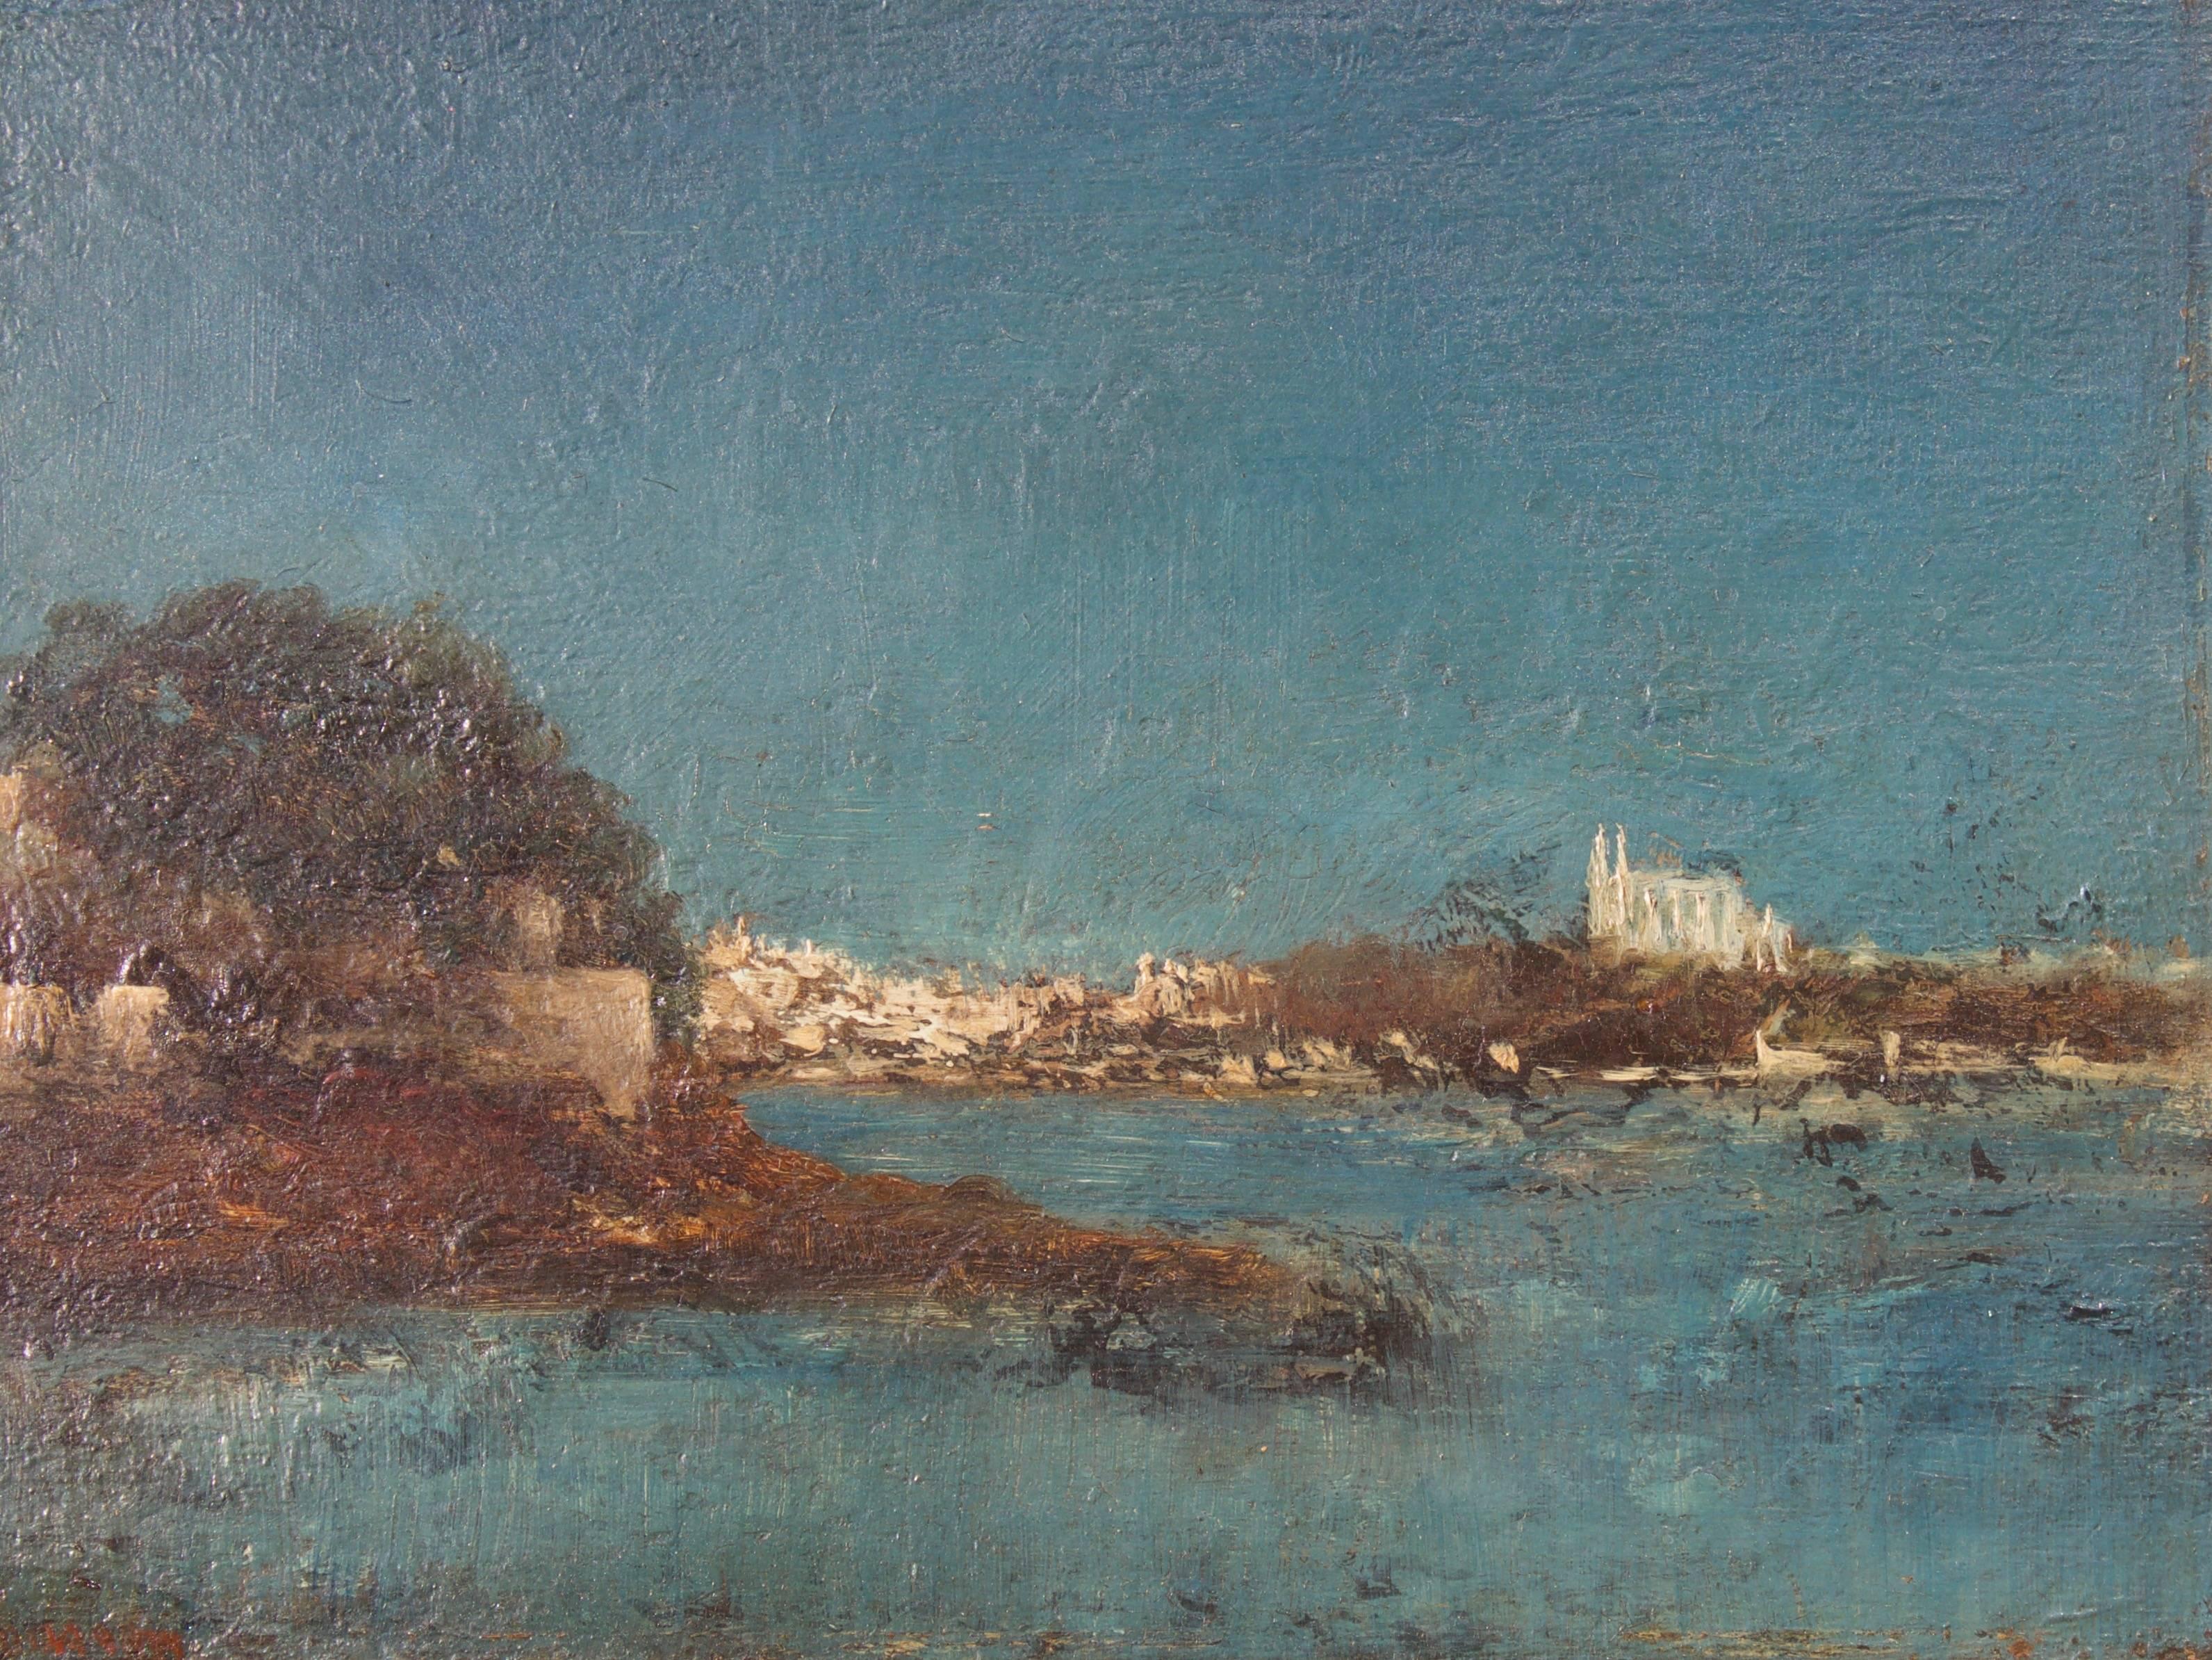 Mallorca with Catedral Santa Maria de Palma - Impressionist Painting by Unknown